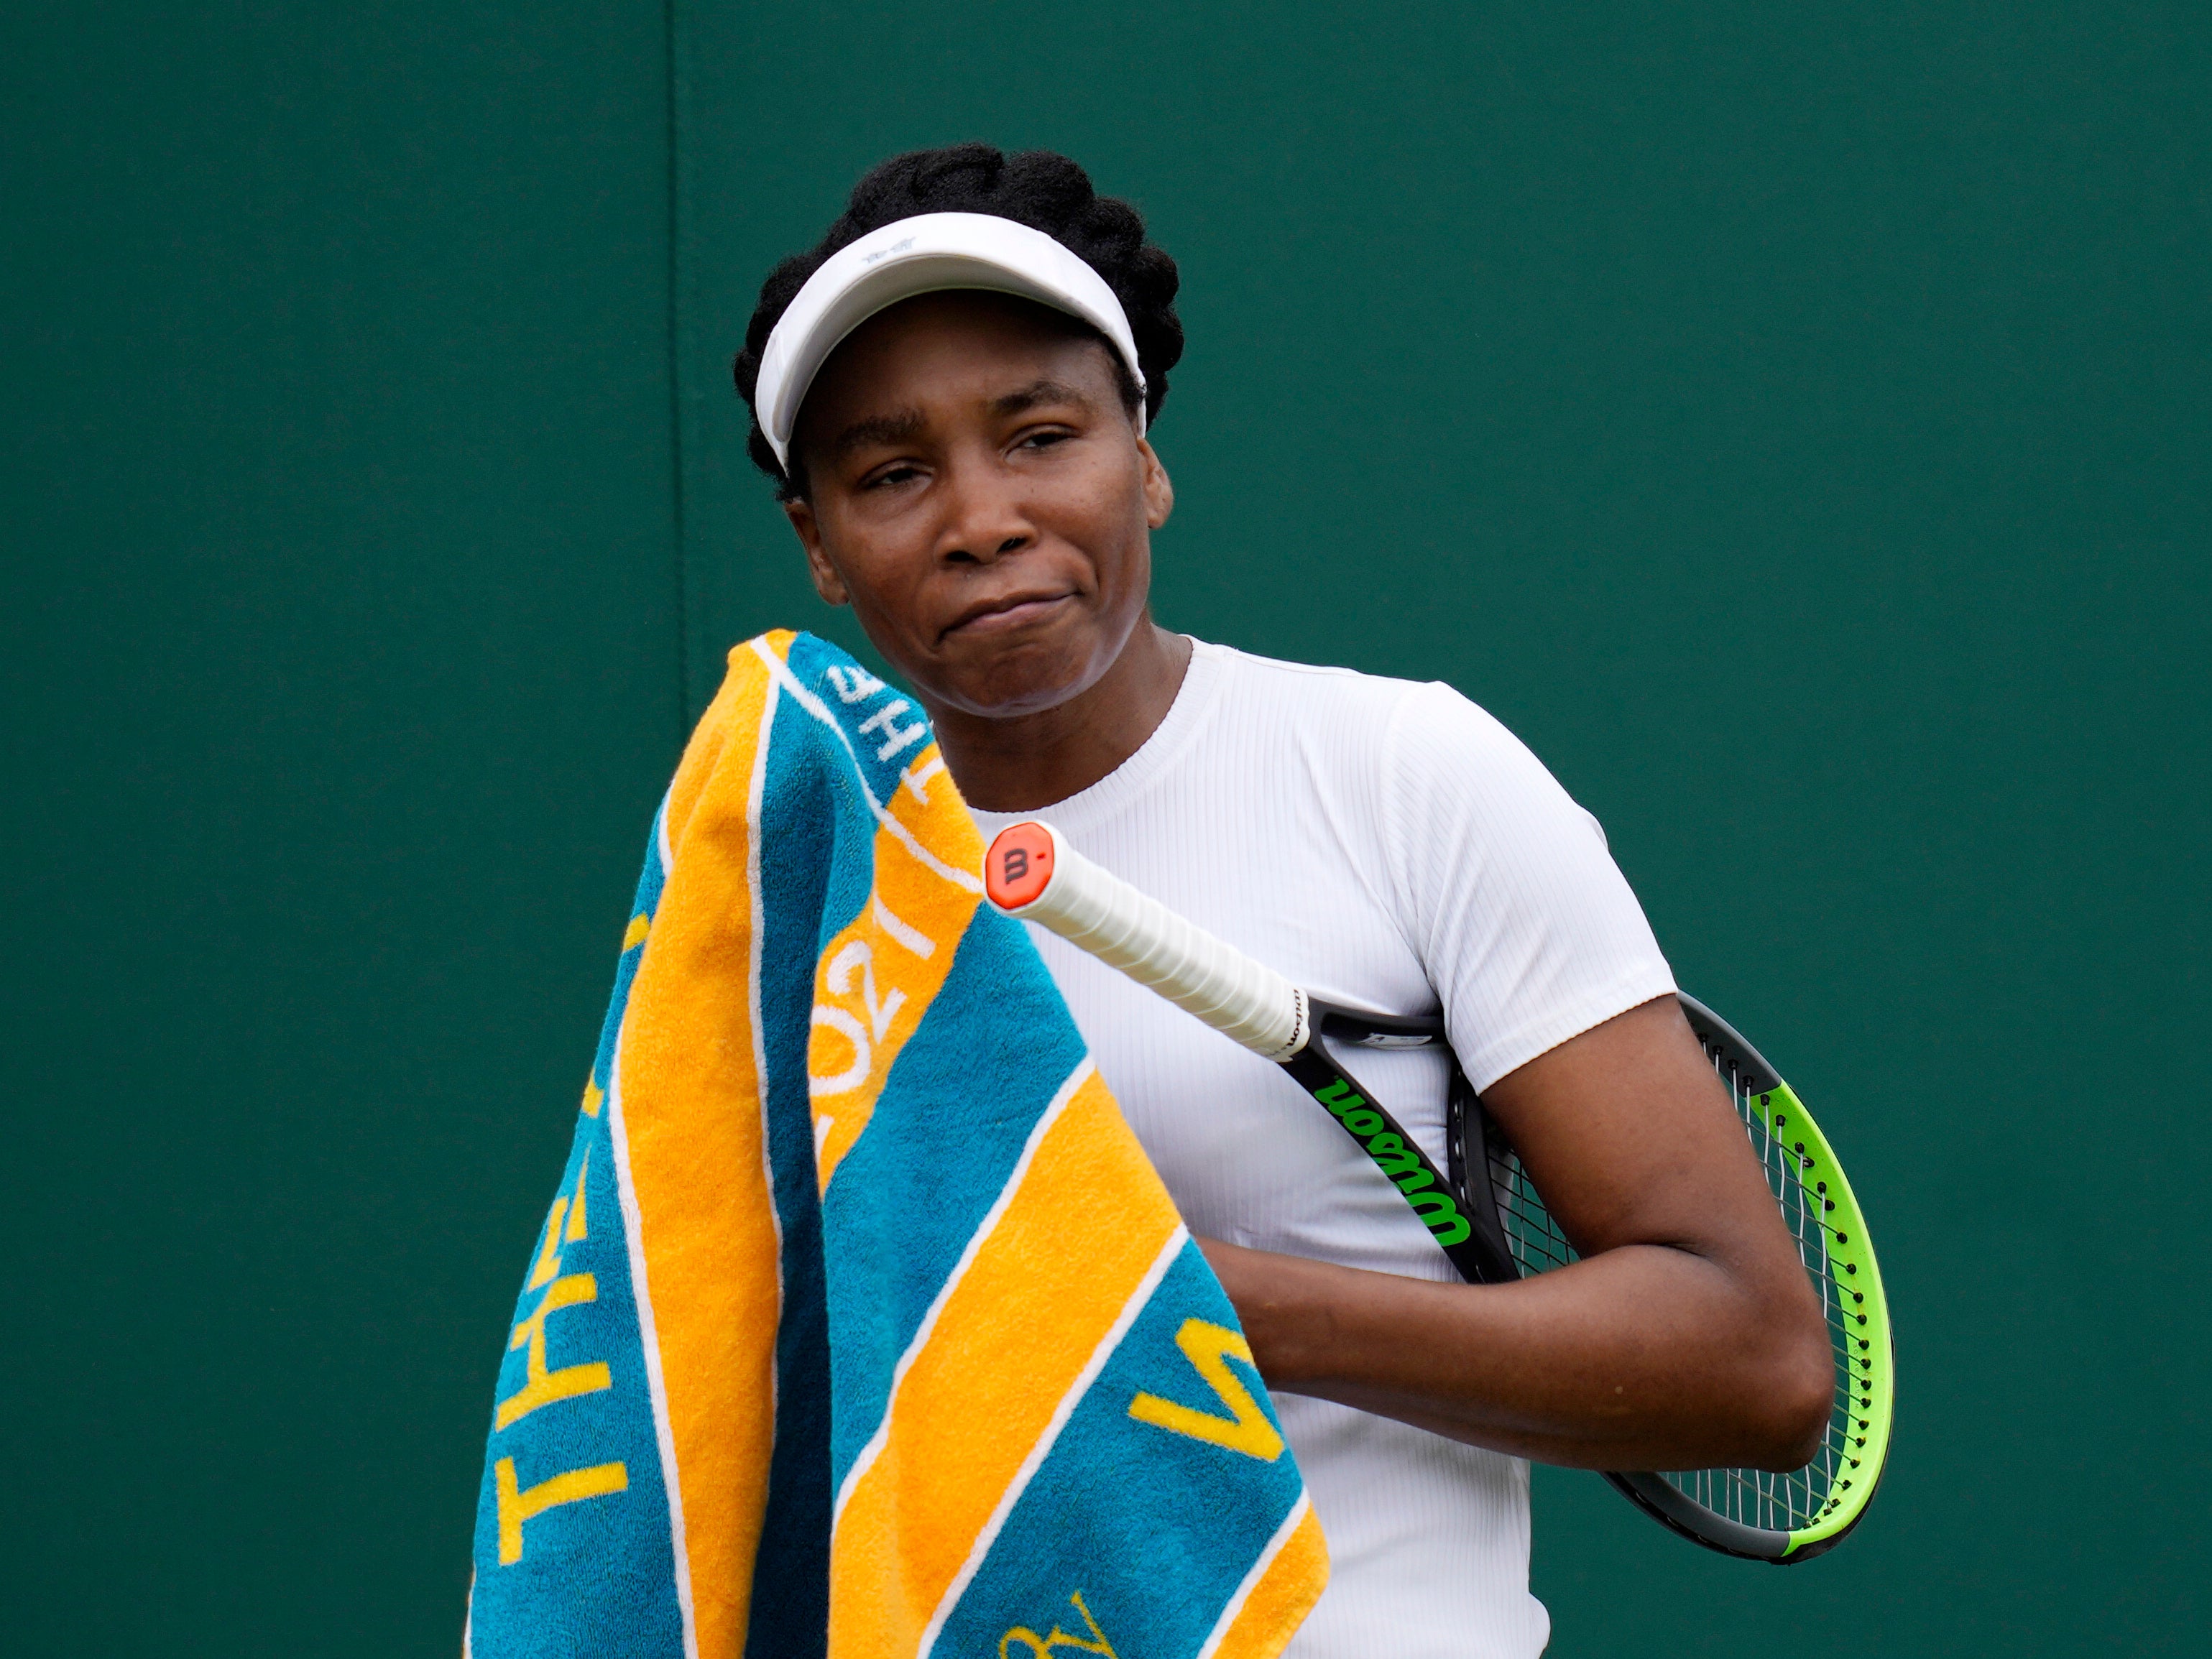 Venus Williams of the US uses a towel during the women's singles first round match against Romania's Mihaela Buzarnescu on day two of the Wimbledon Tennis Championships in London